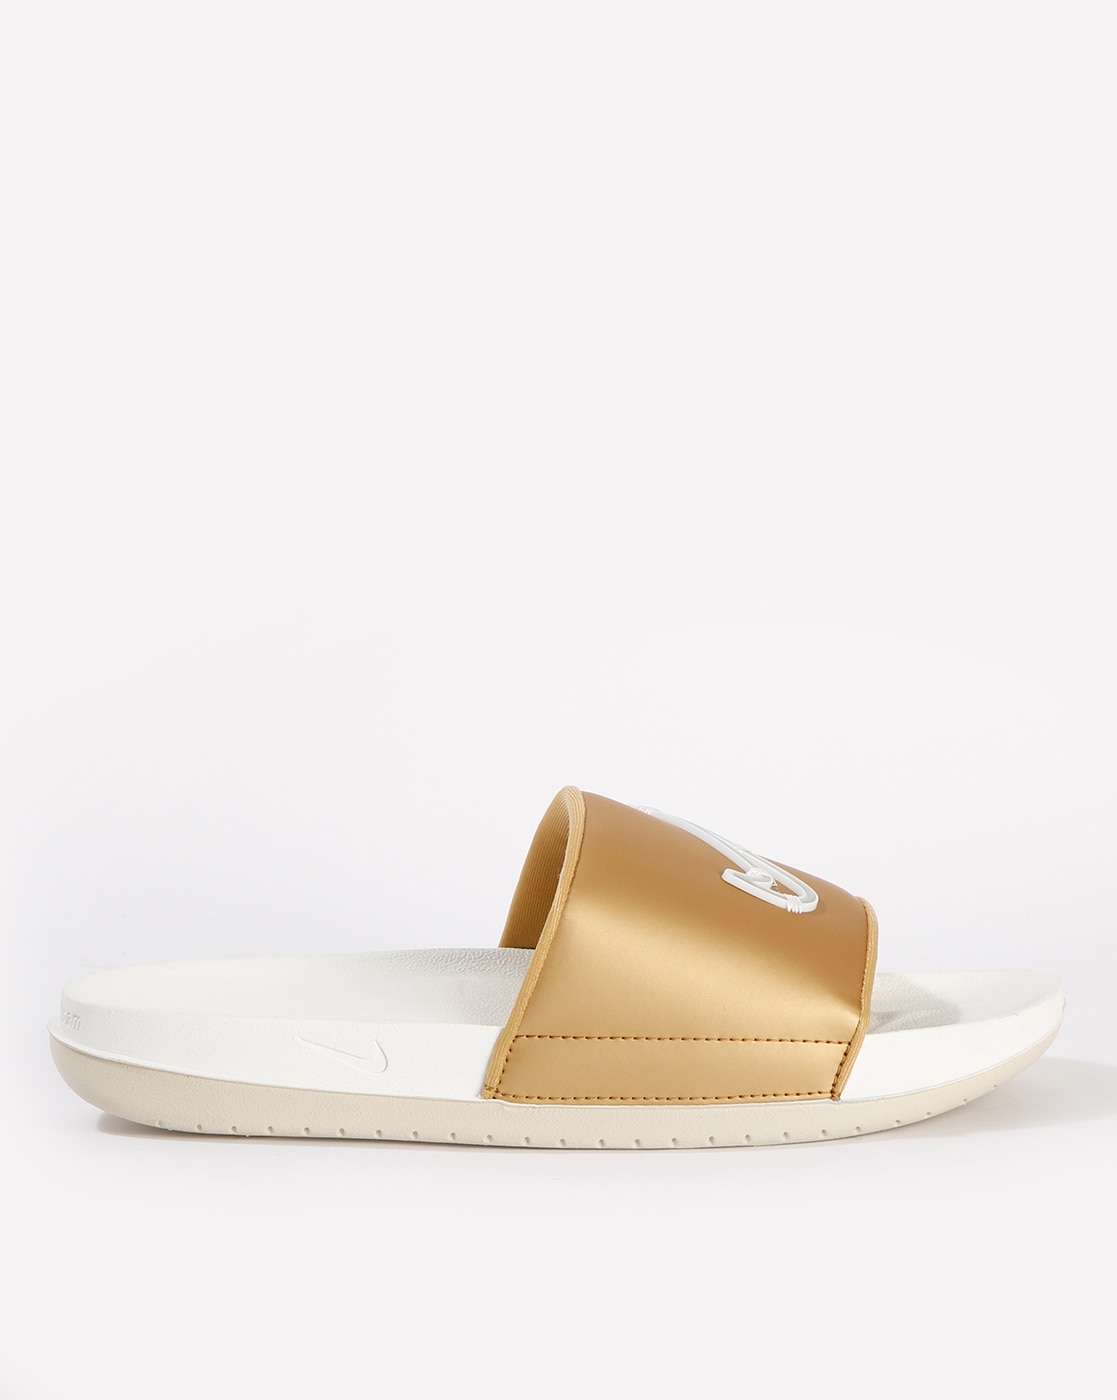 nike slippers with gold logo